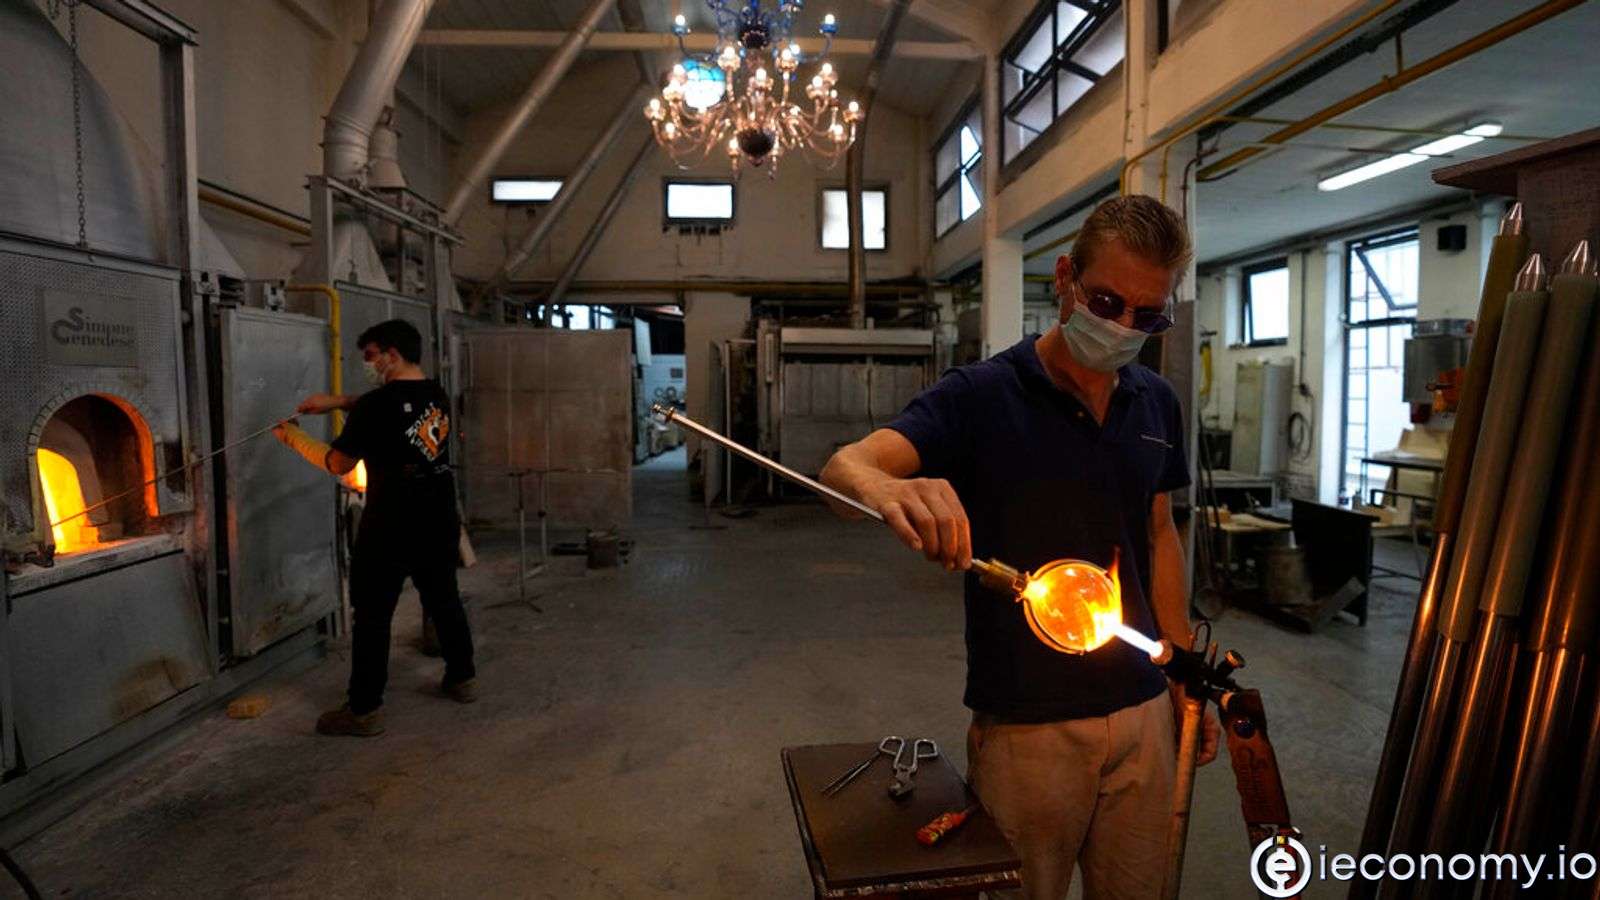 World-famous glassmakers from Murano are destroyed by expensive gas